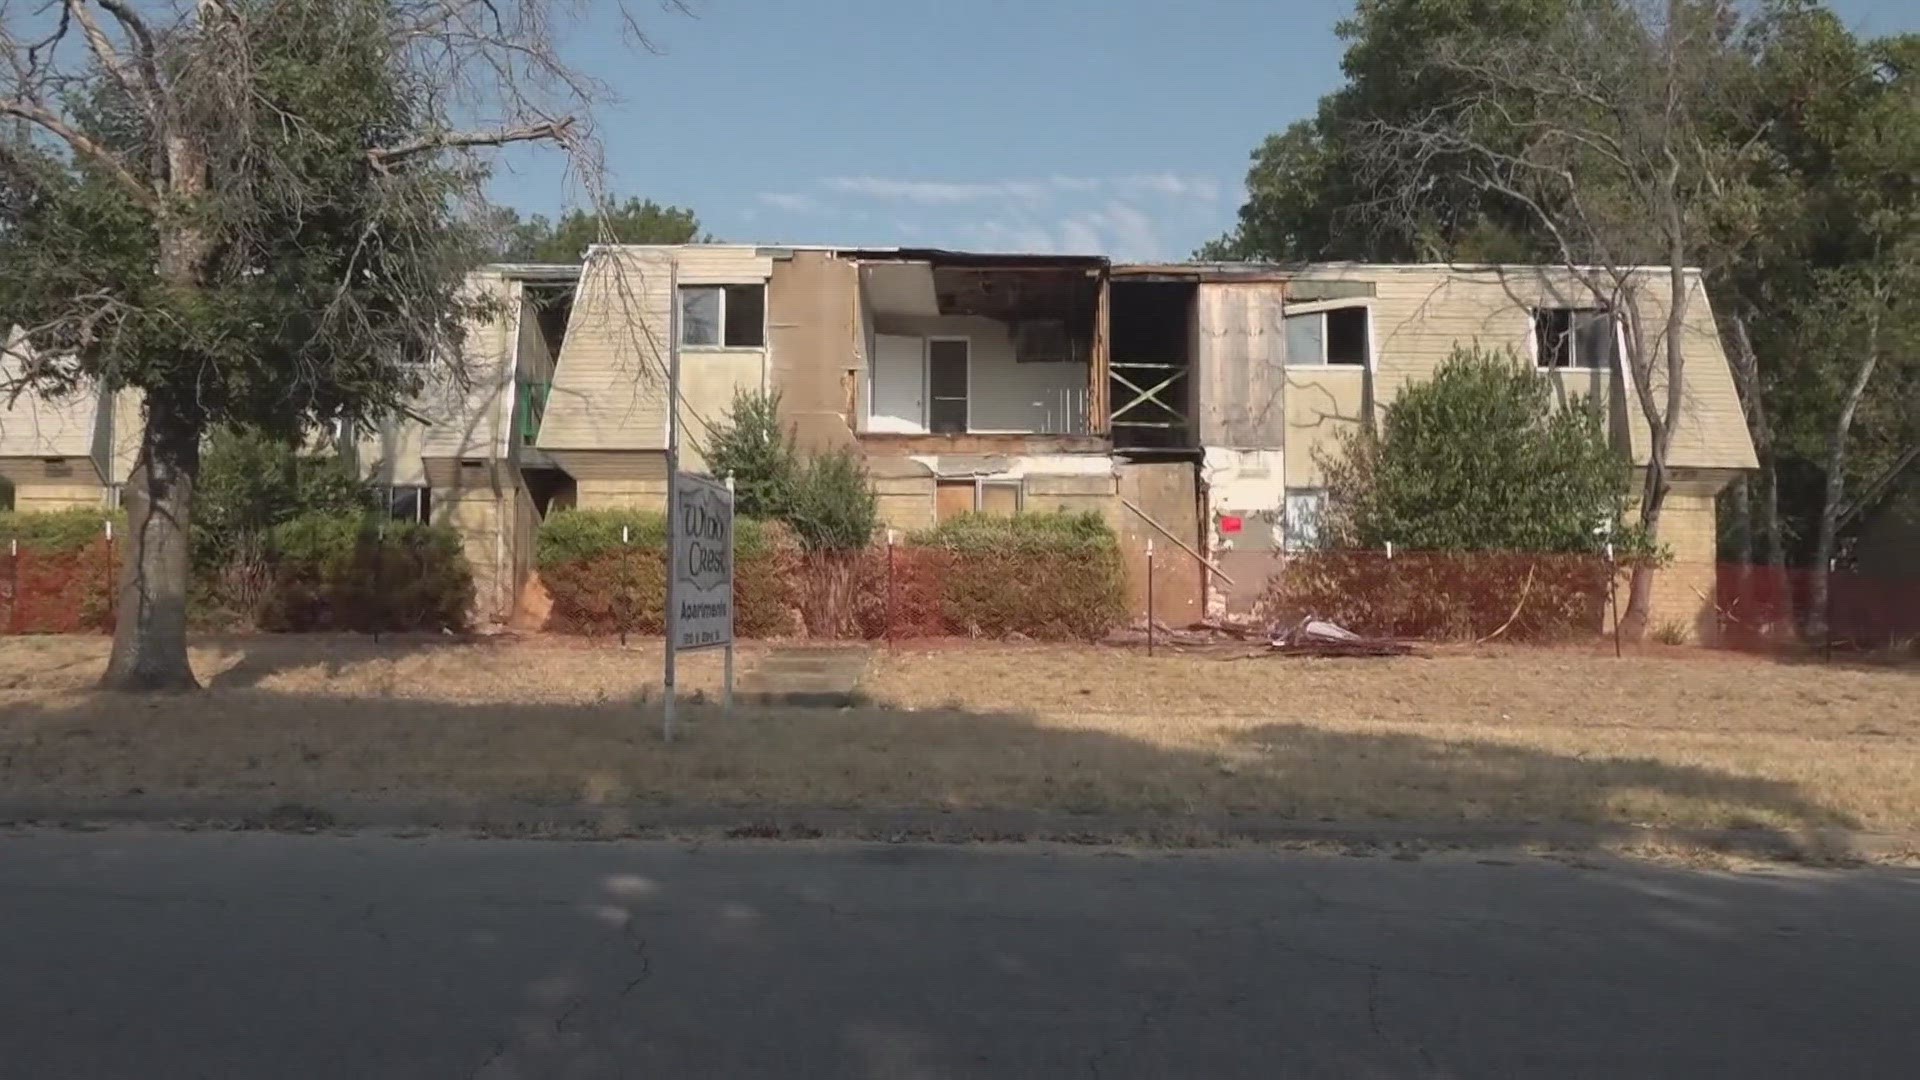 Temple residents claim the burned down Wind Crest apartments attracts drug dealers and squatters.